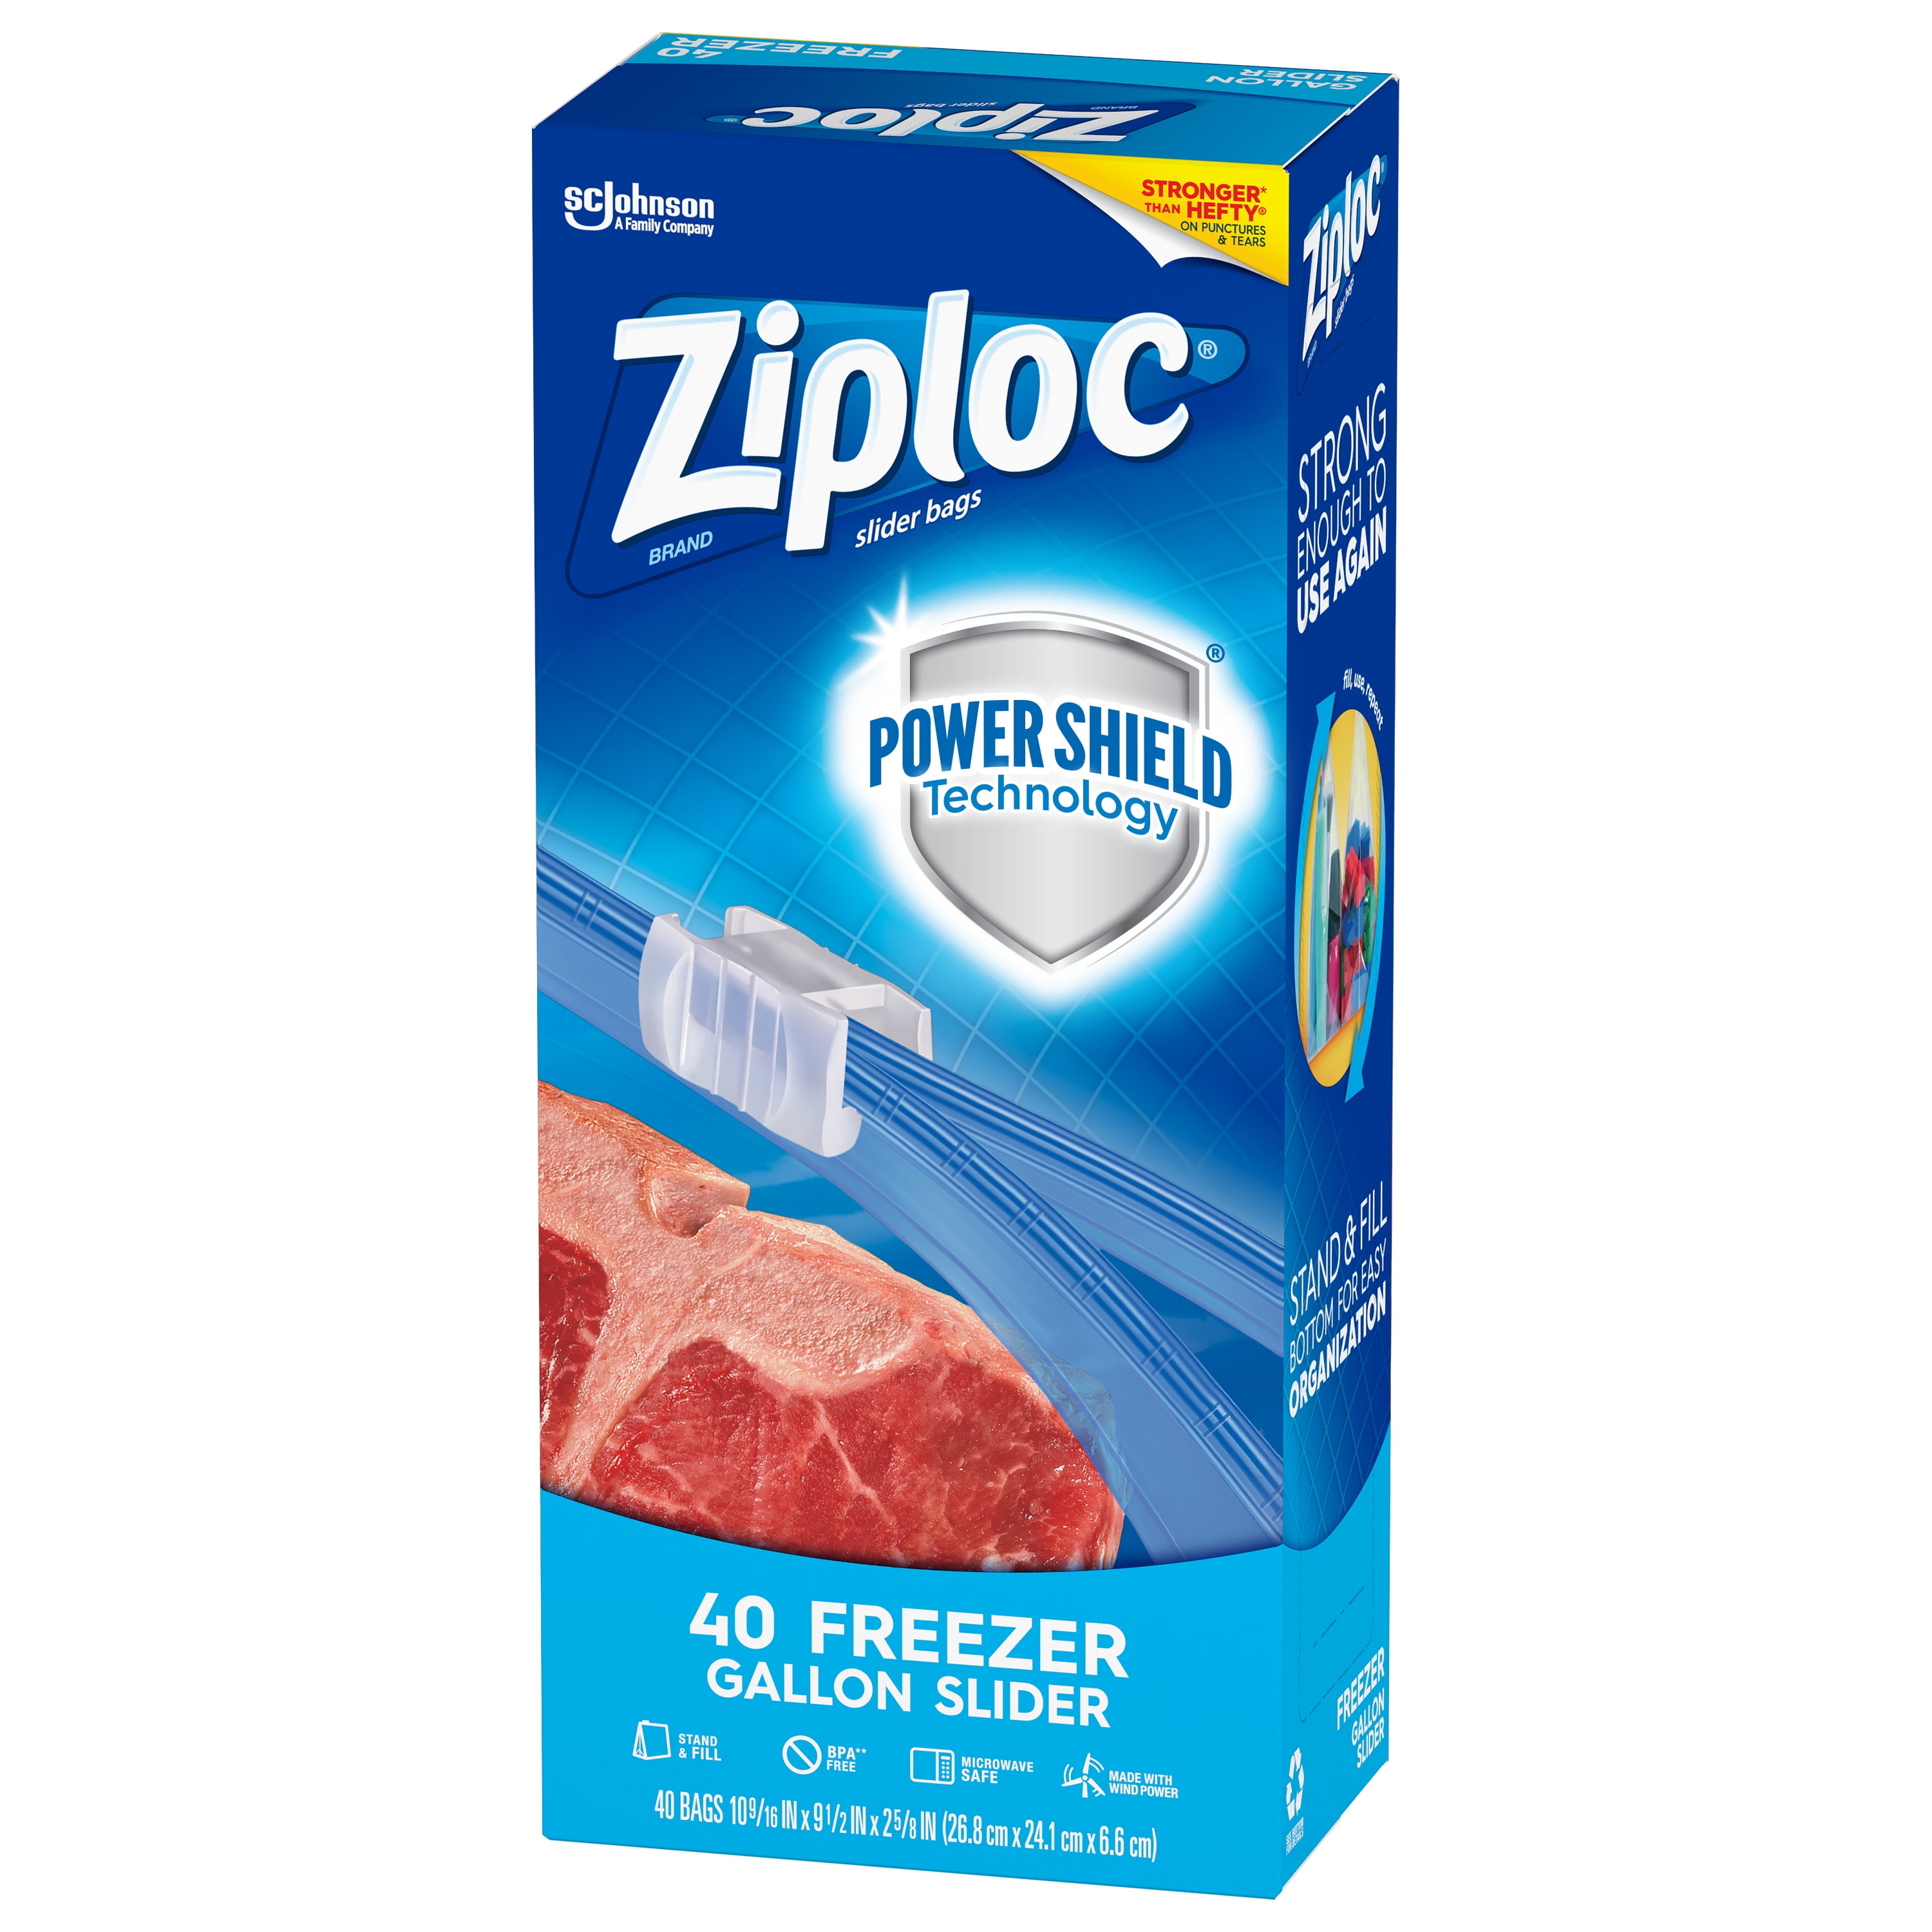 Ziploc brand Freezer Bags Extra Large reviews in Home Organization and  Storage - ChickAdvisor